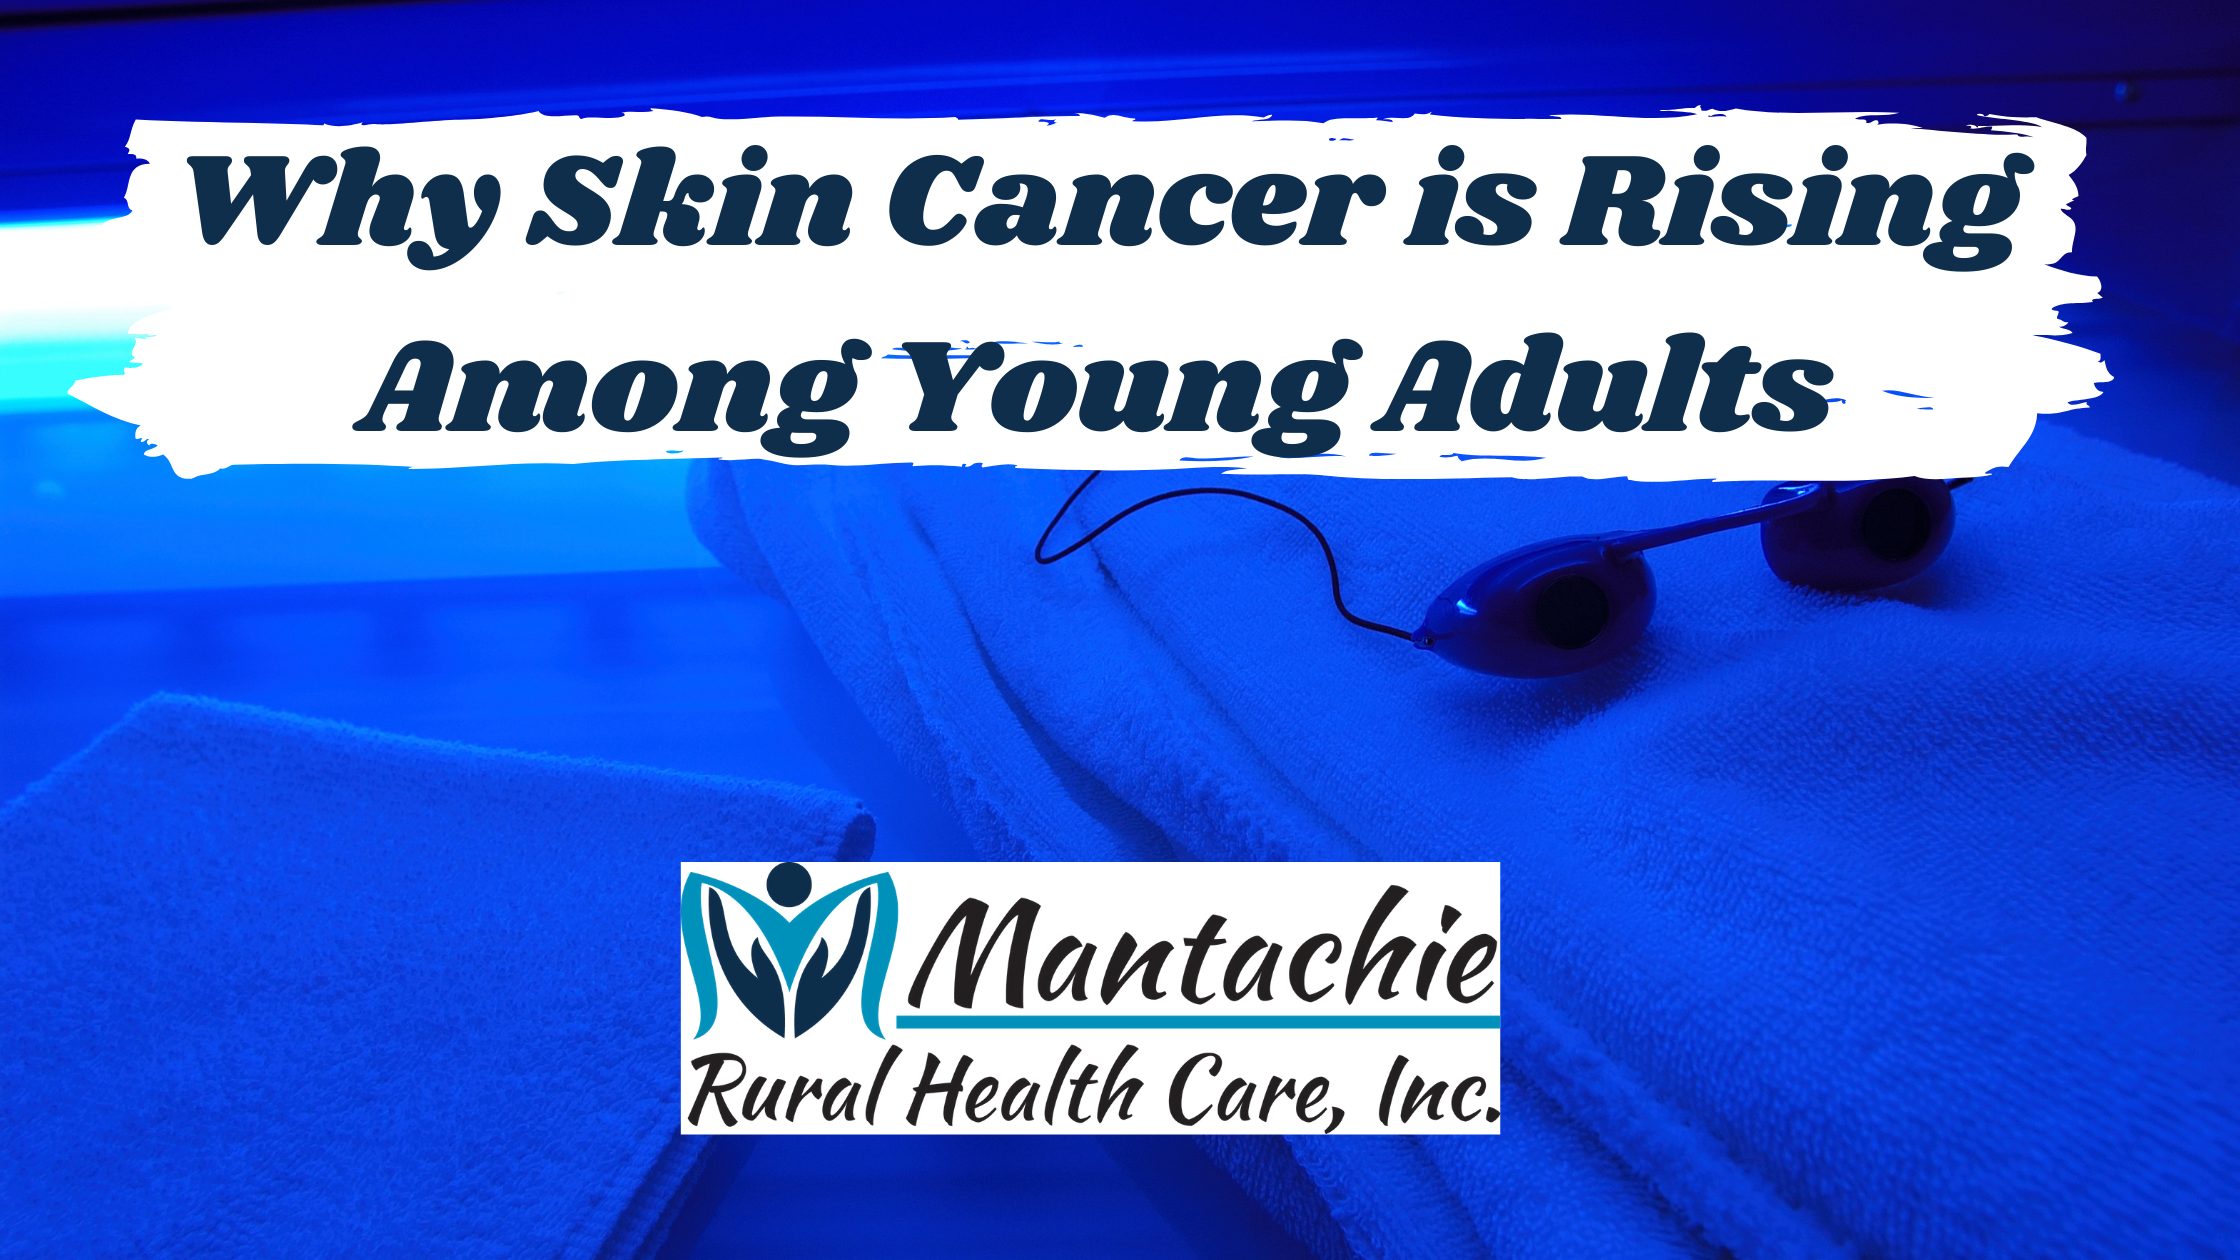 Why Skin Cancer is Rising Among Young Adults